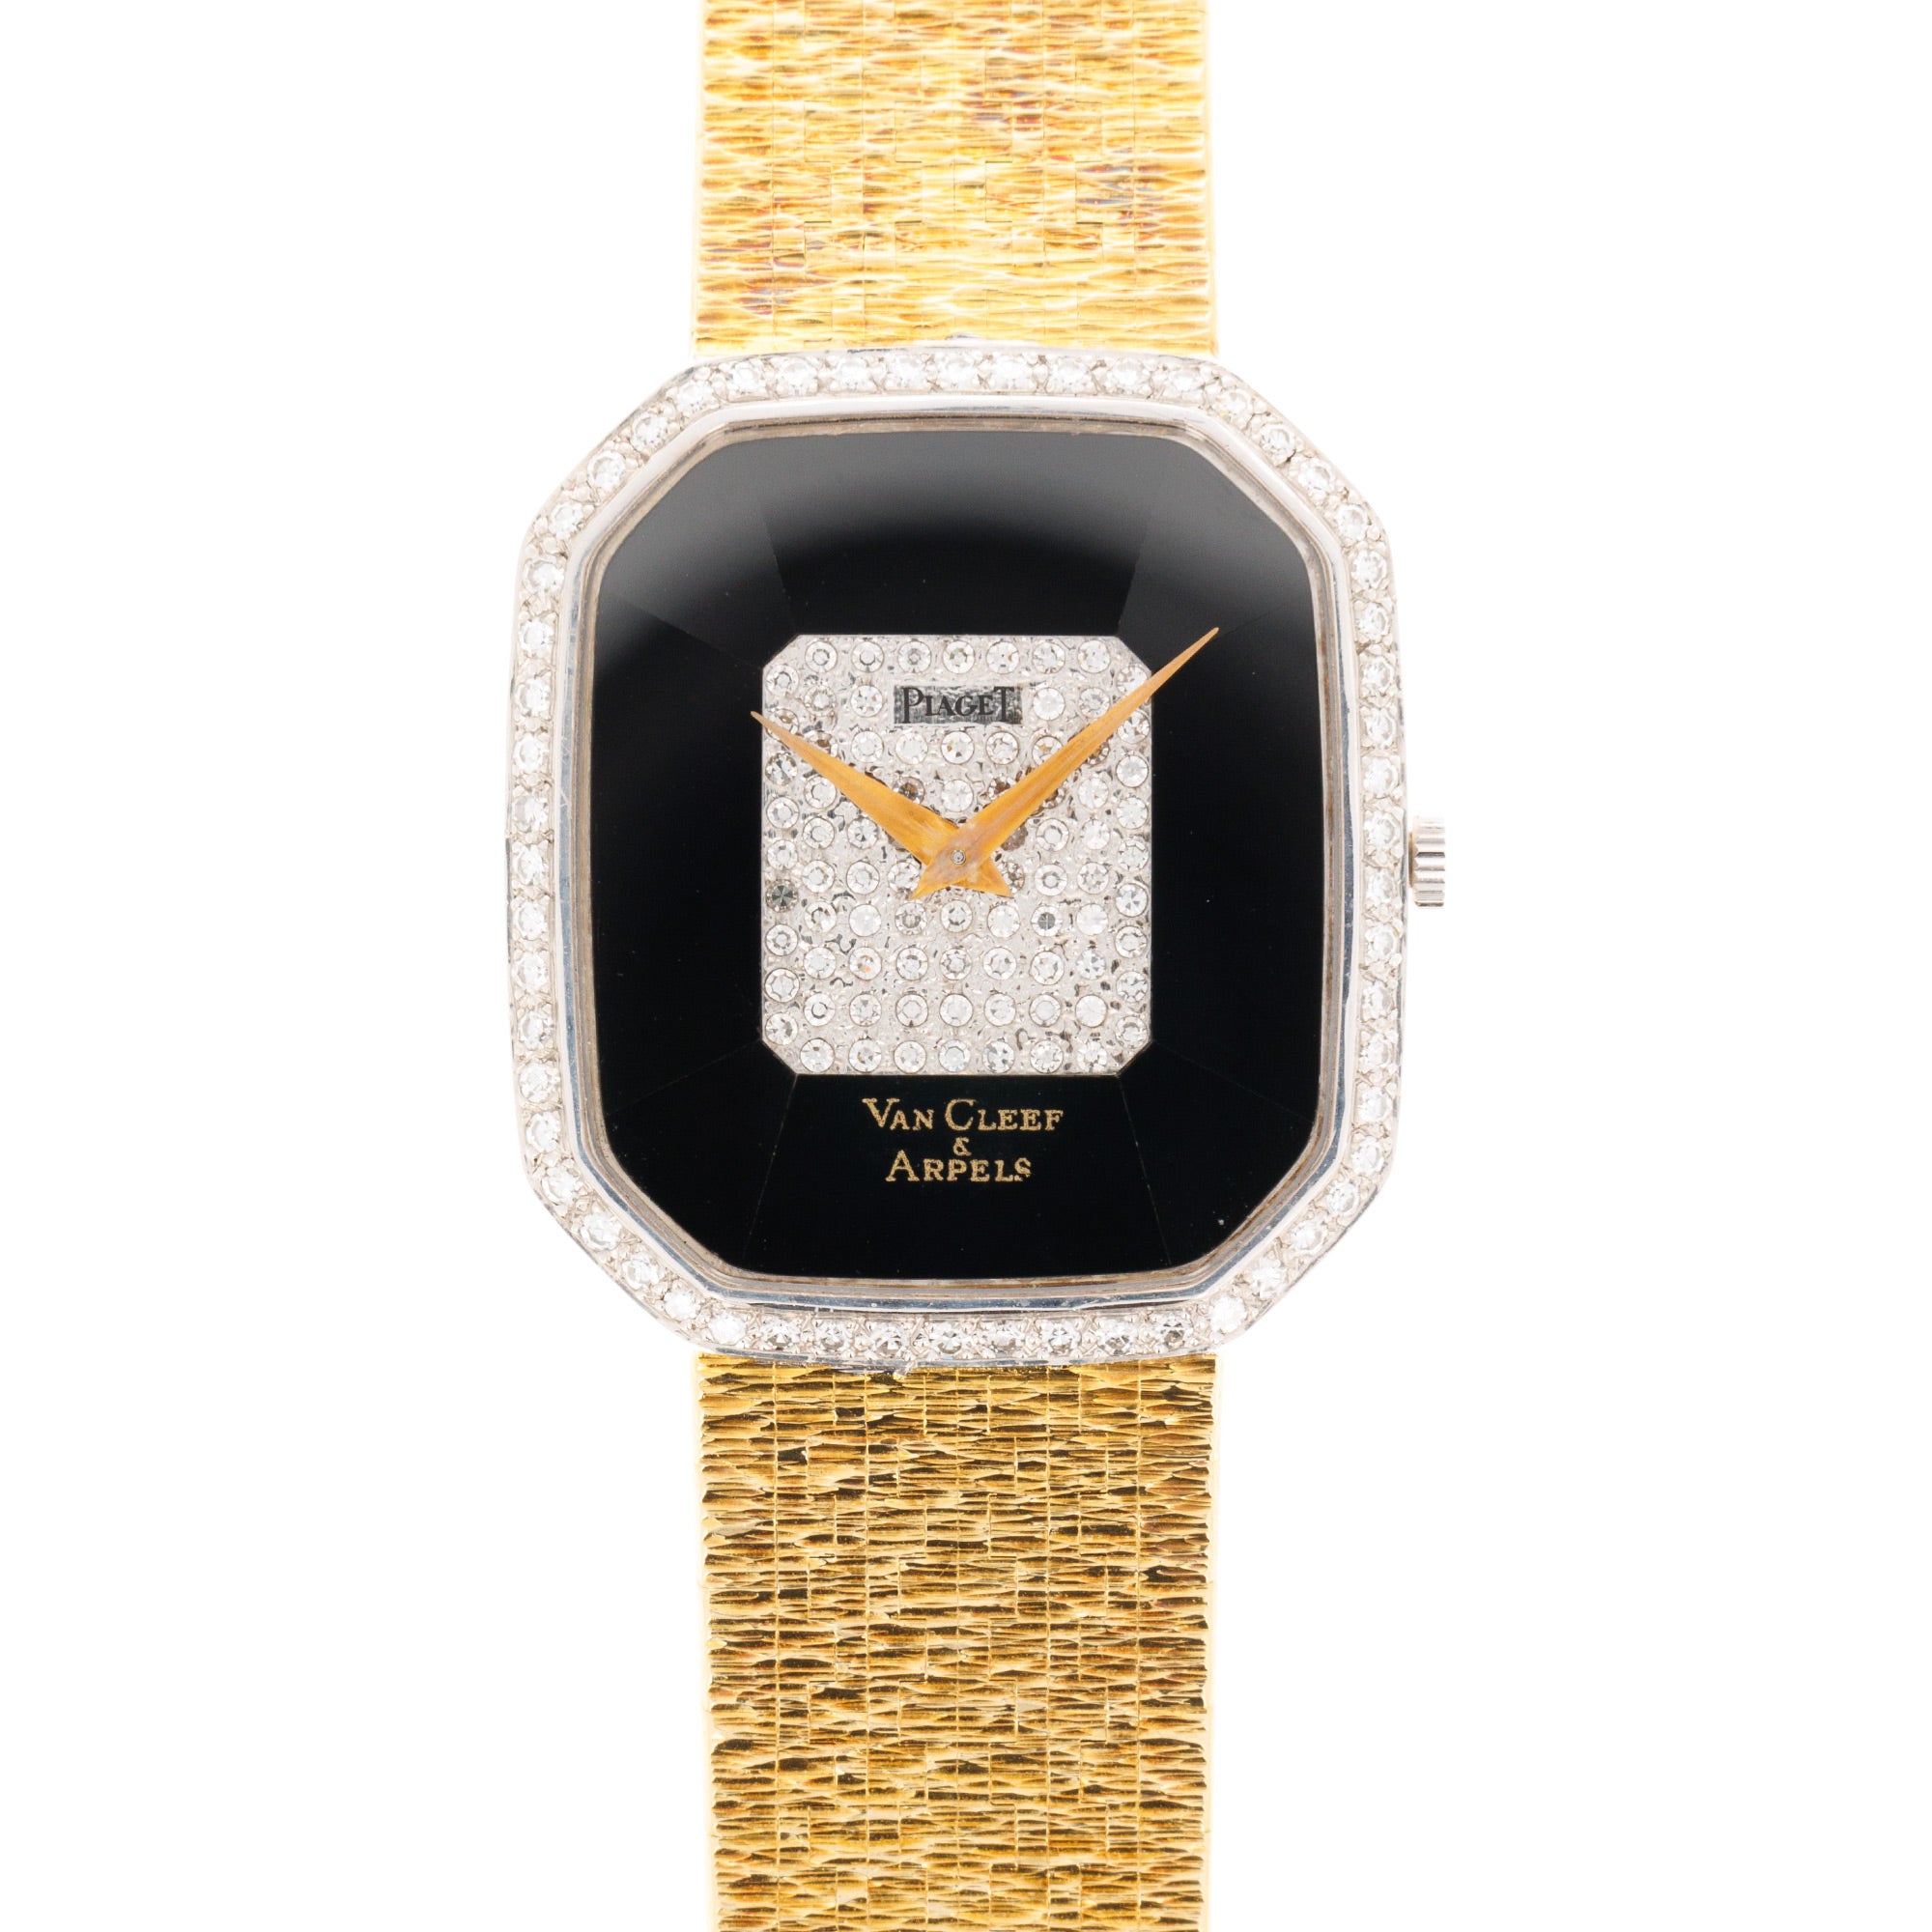 Piaget - Piaget Yellow Gold Onyx Diamond ref 9795A6 retailed by Van Cleef &amp; Arpels - The Keystone Watches